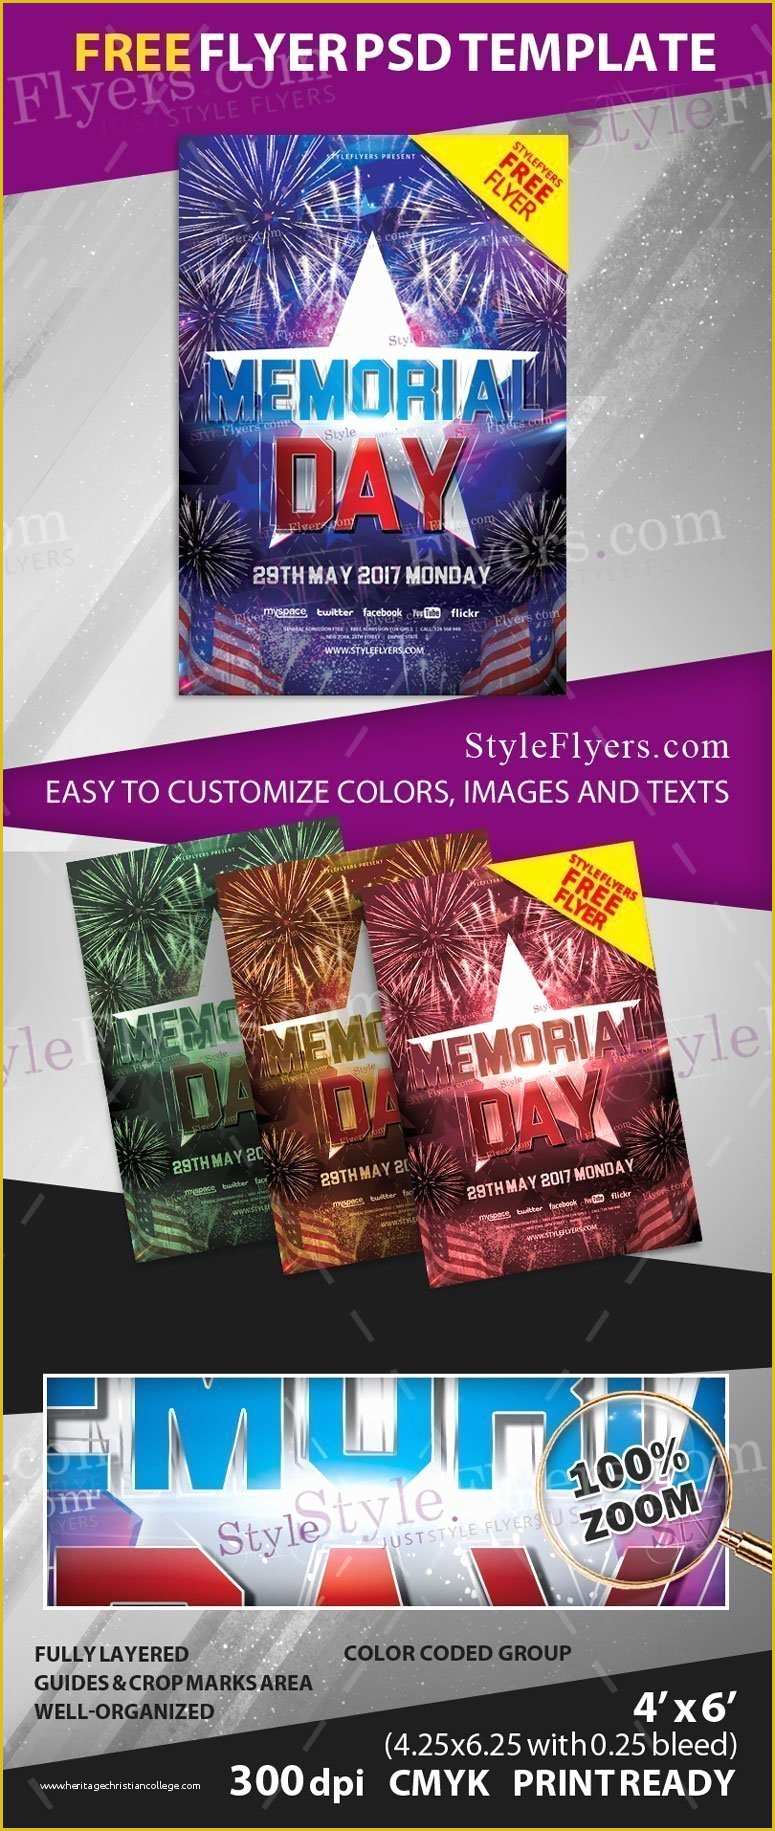 Free Funeral Flyer Template Psd Of Memorial Day Free Flyer Psd Template Free Download